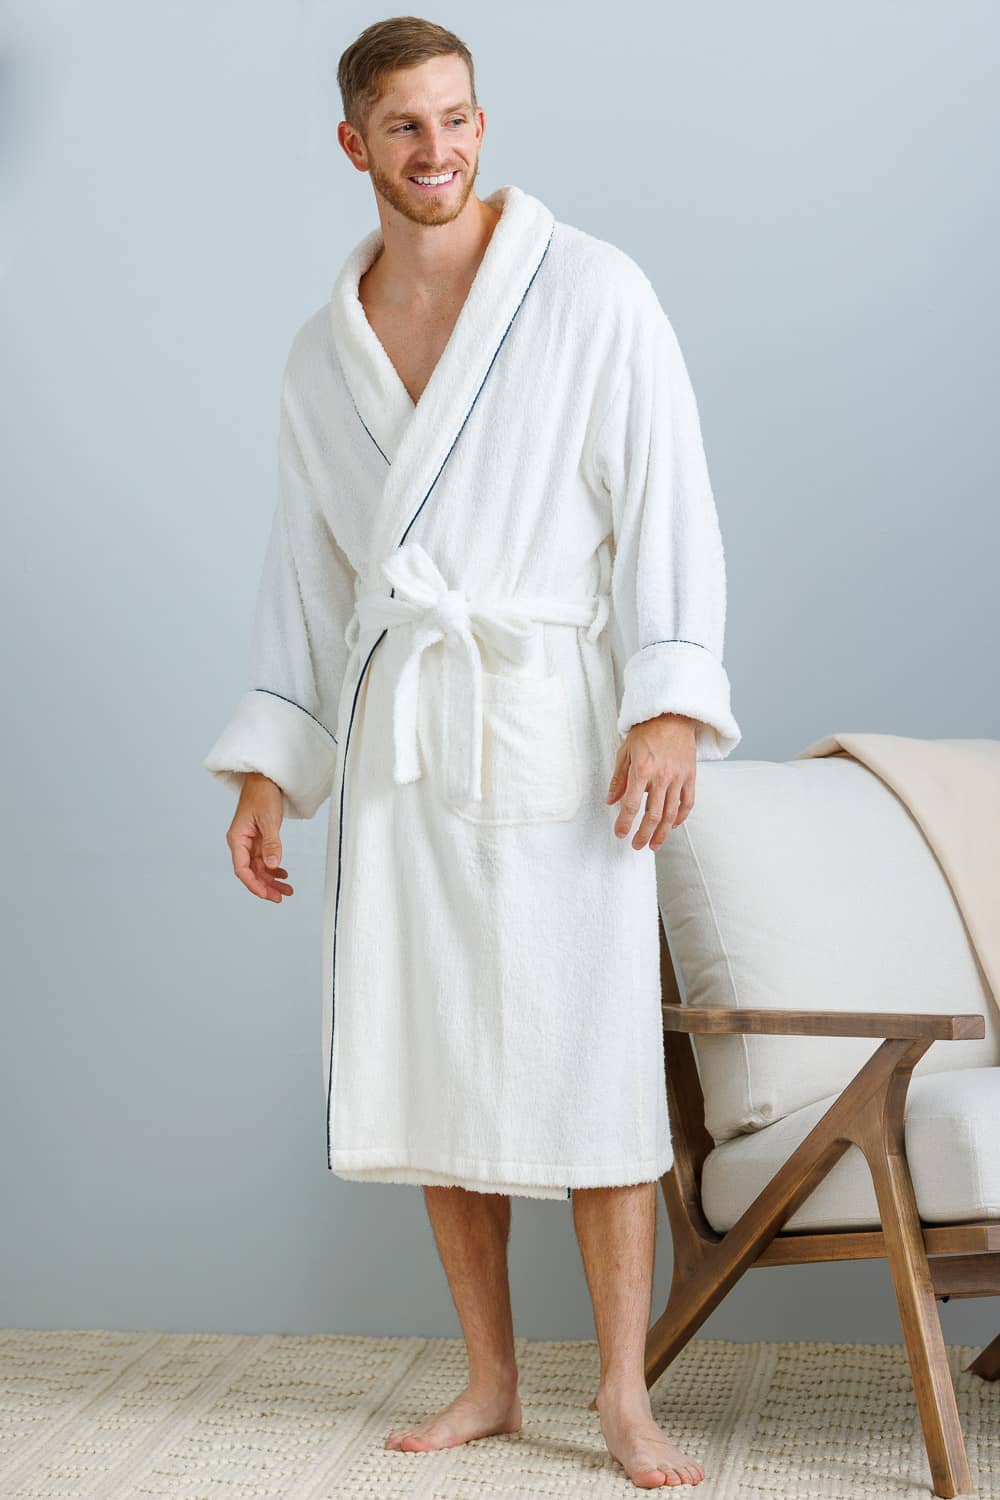 Shop by Style - Bath Robes for Women and Men